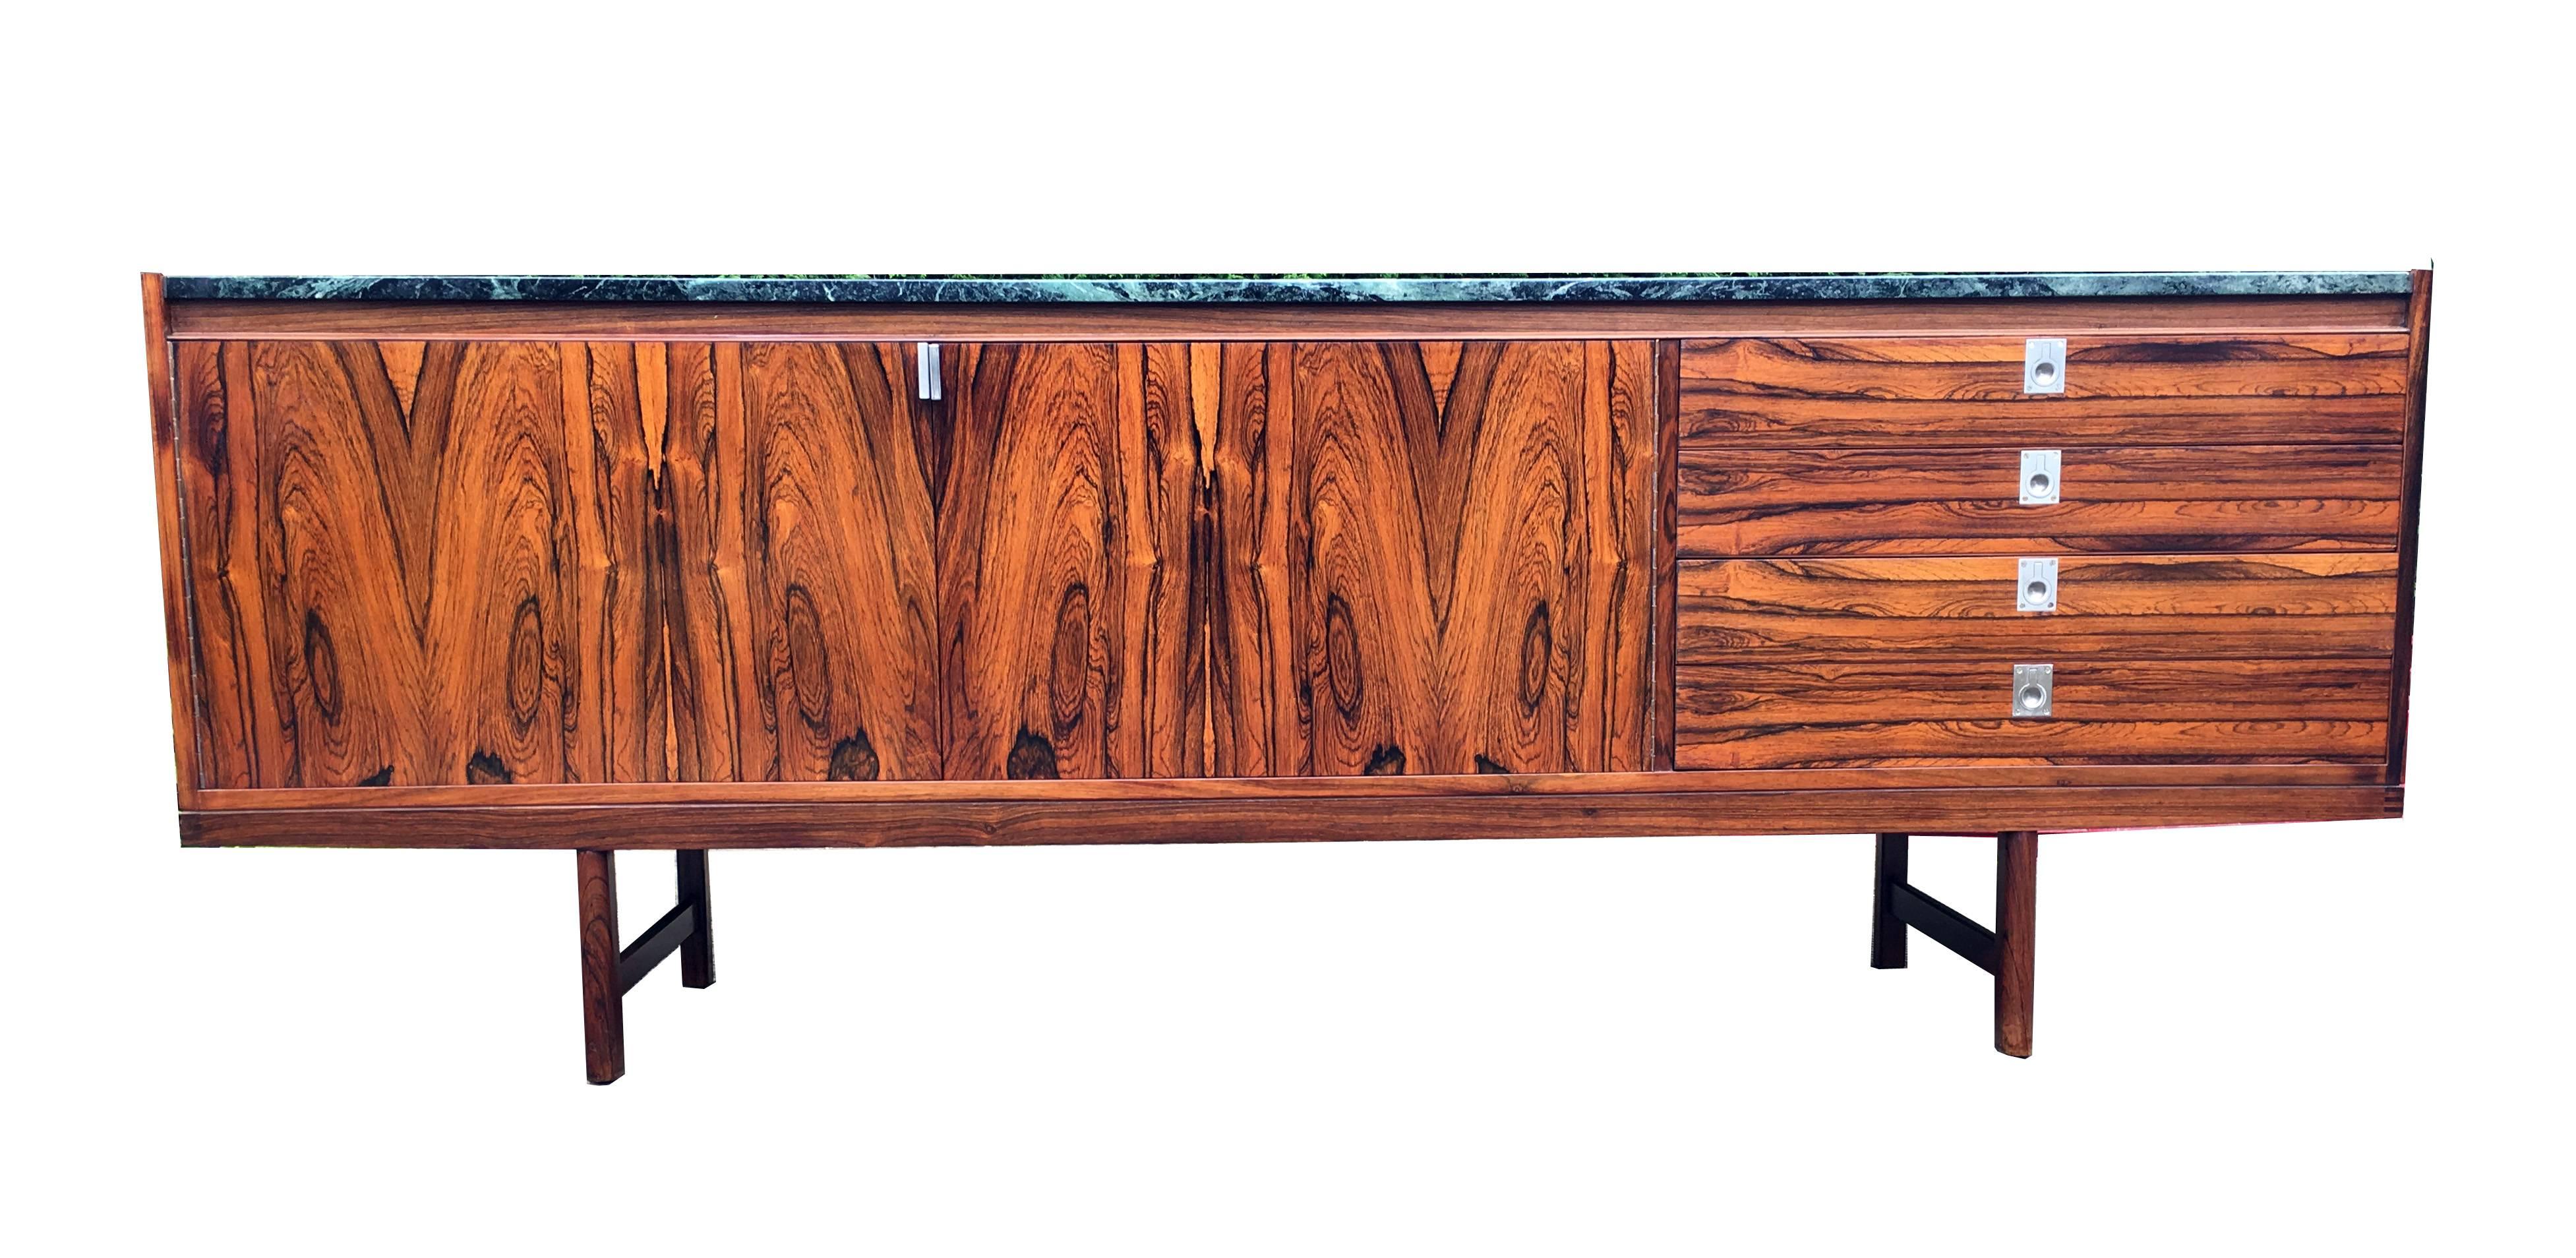 Stunning example of this rare sideboard or credenza in superb condition.